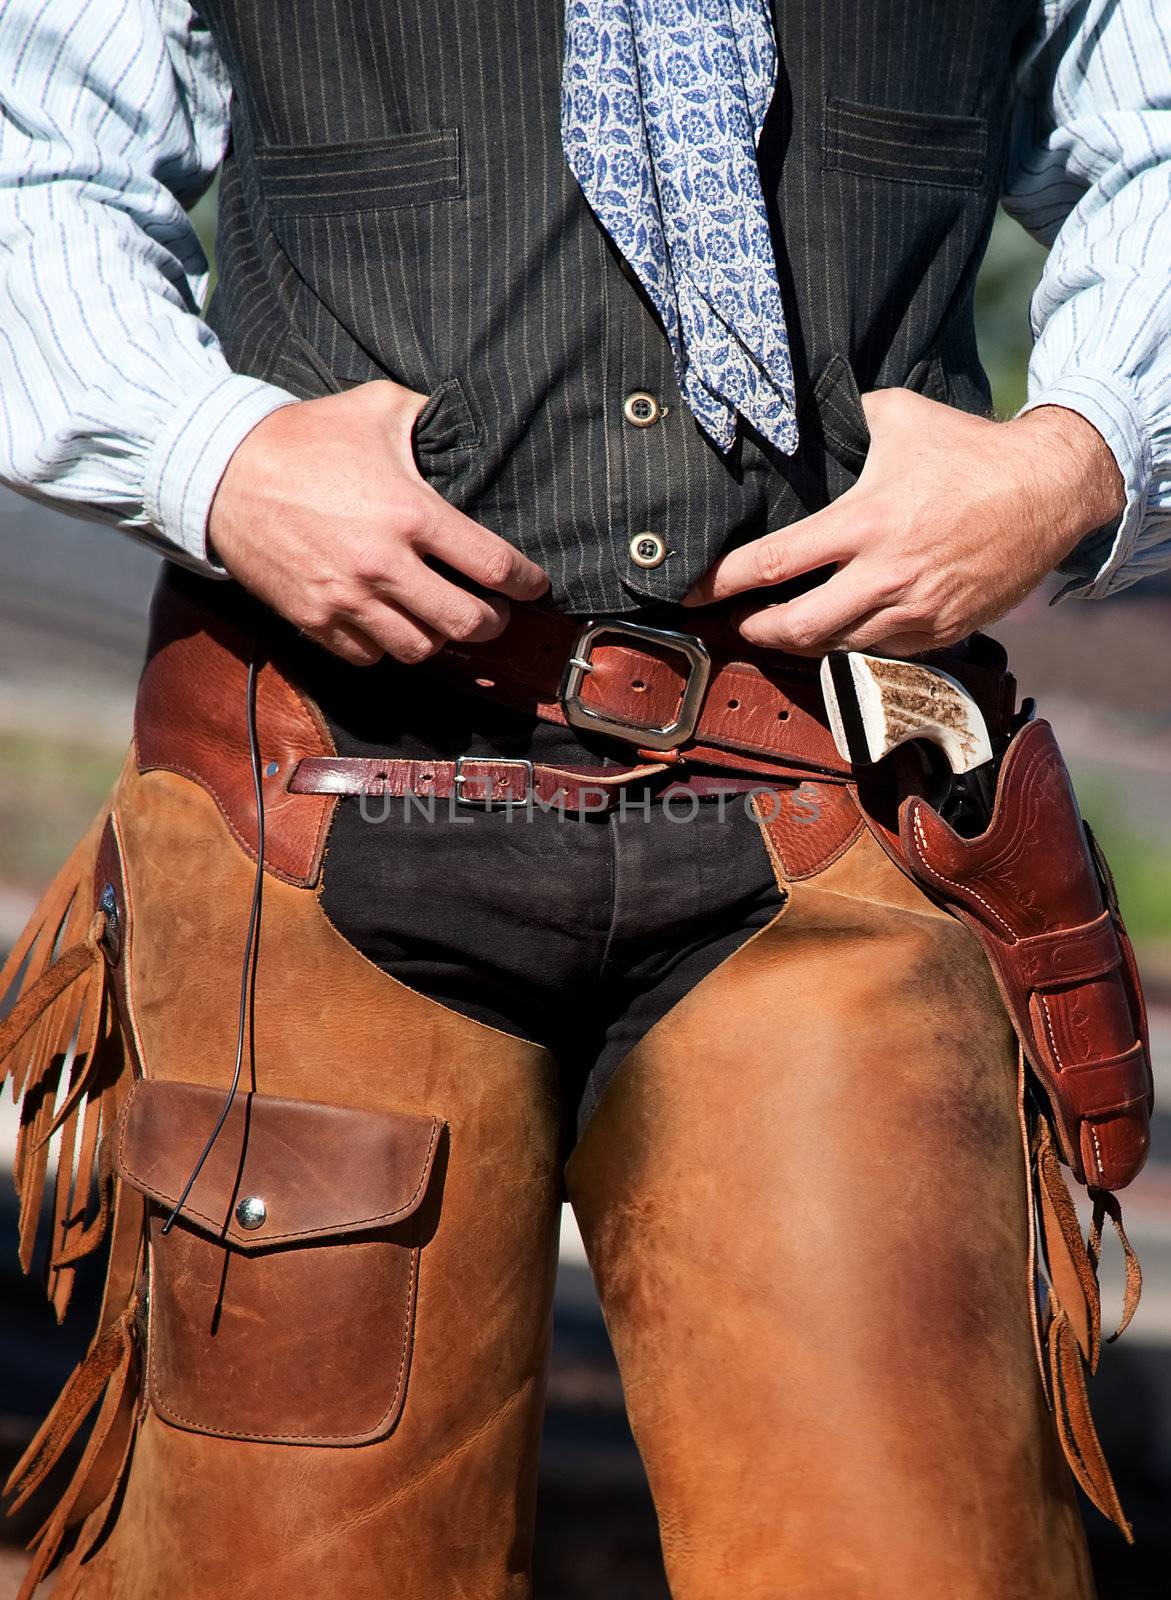 Closeup of cowboy with chaps, guns and leather belt